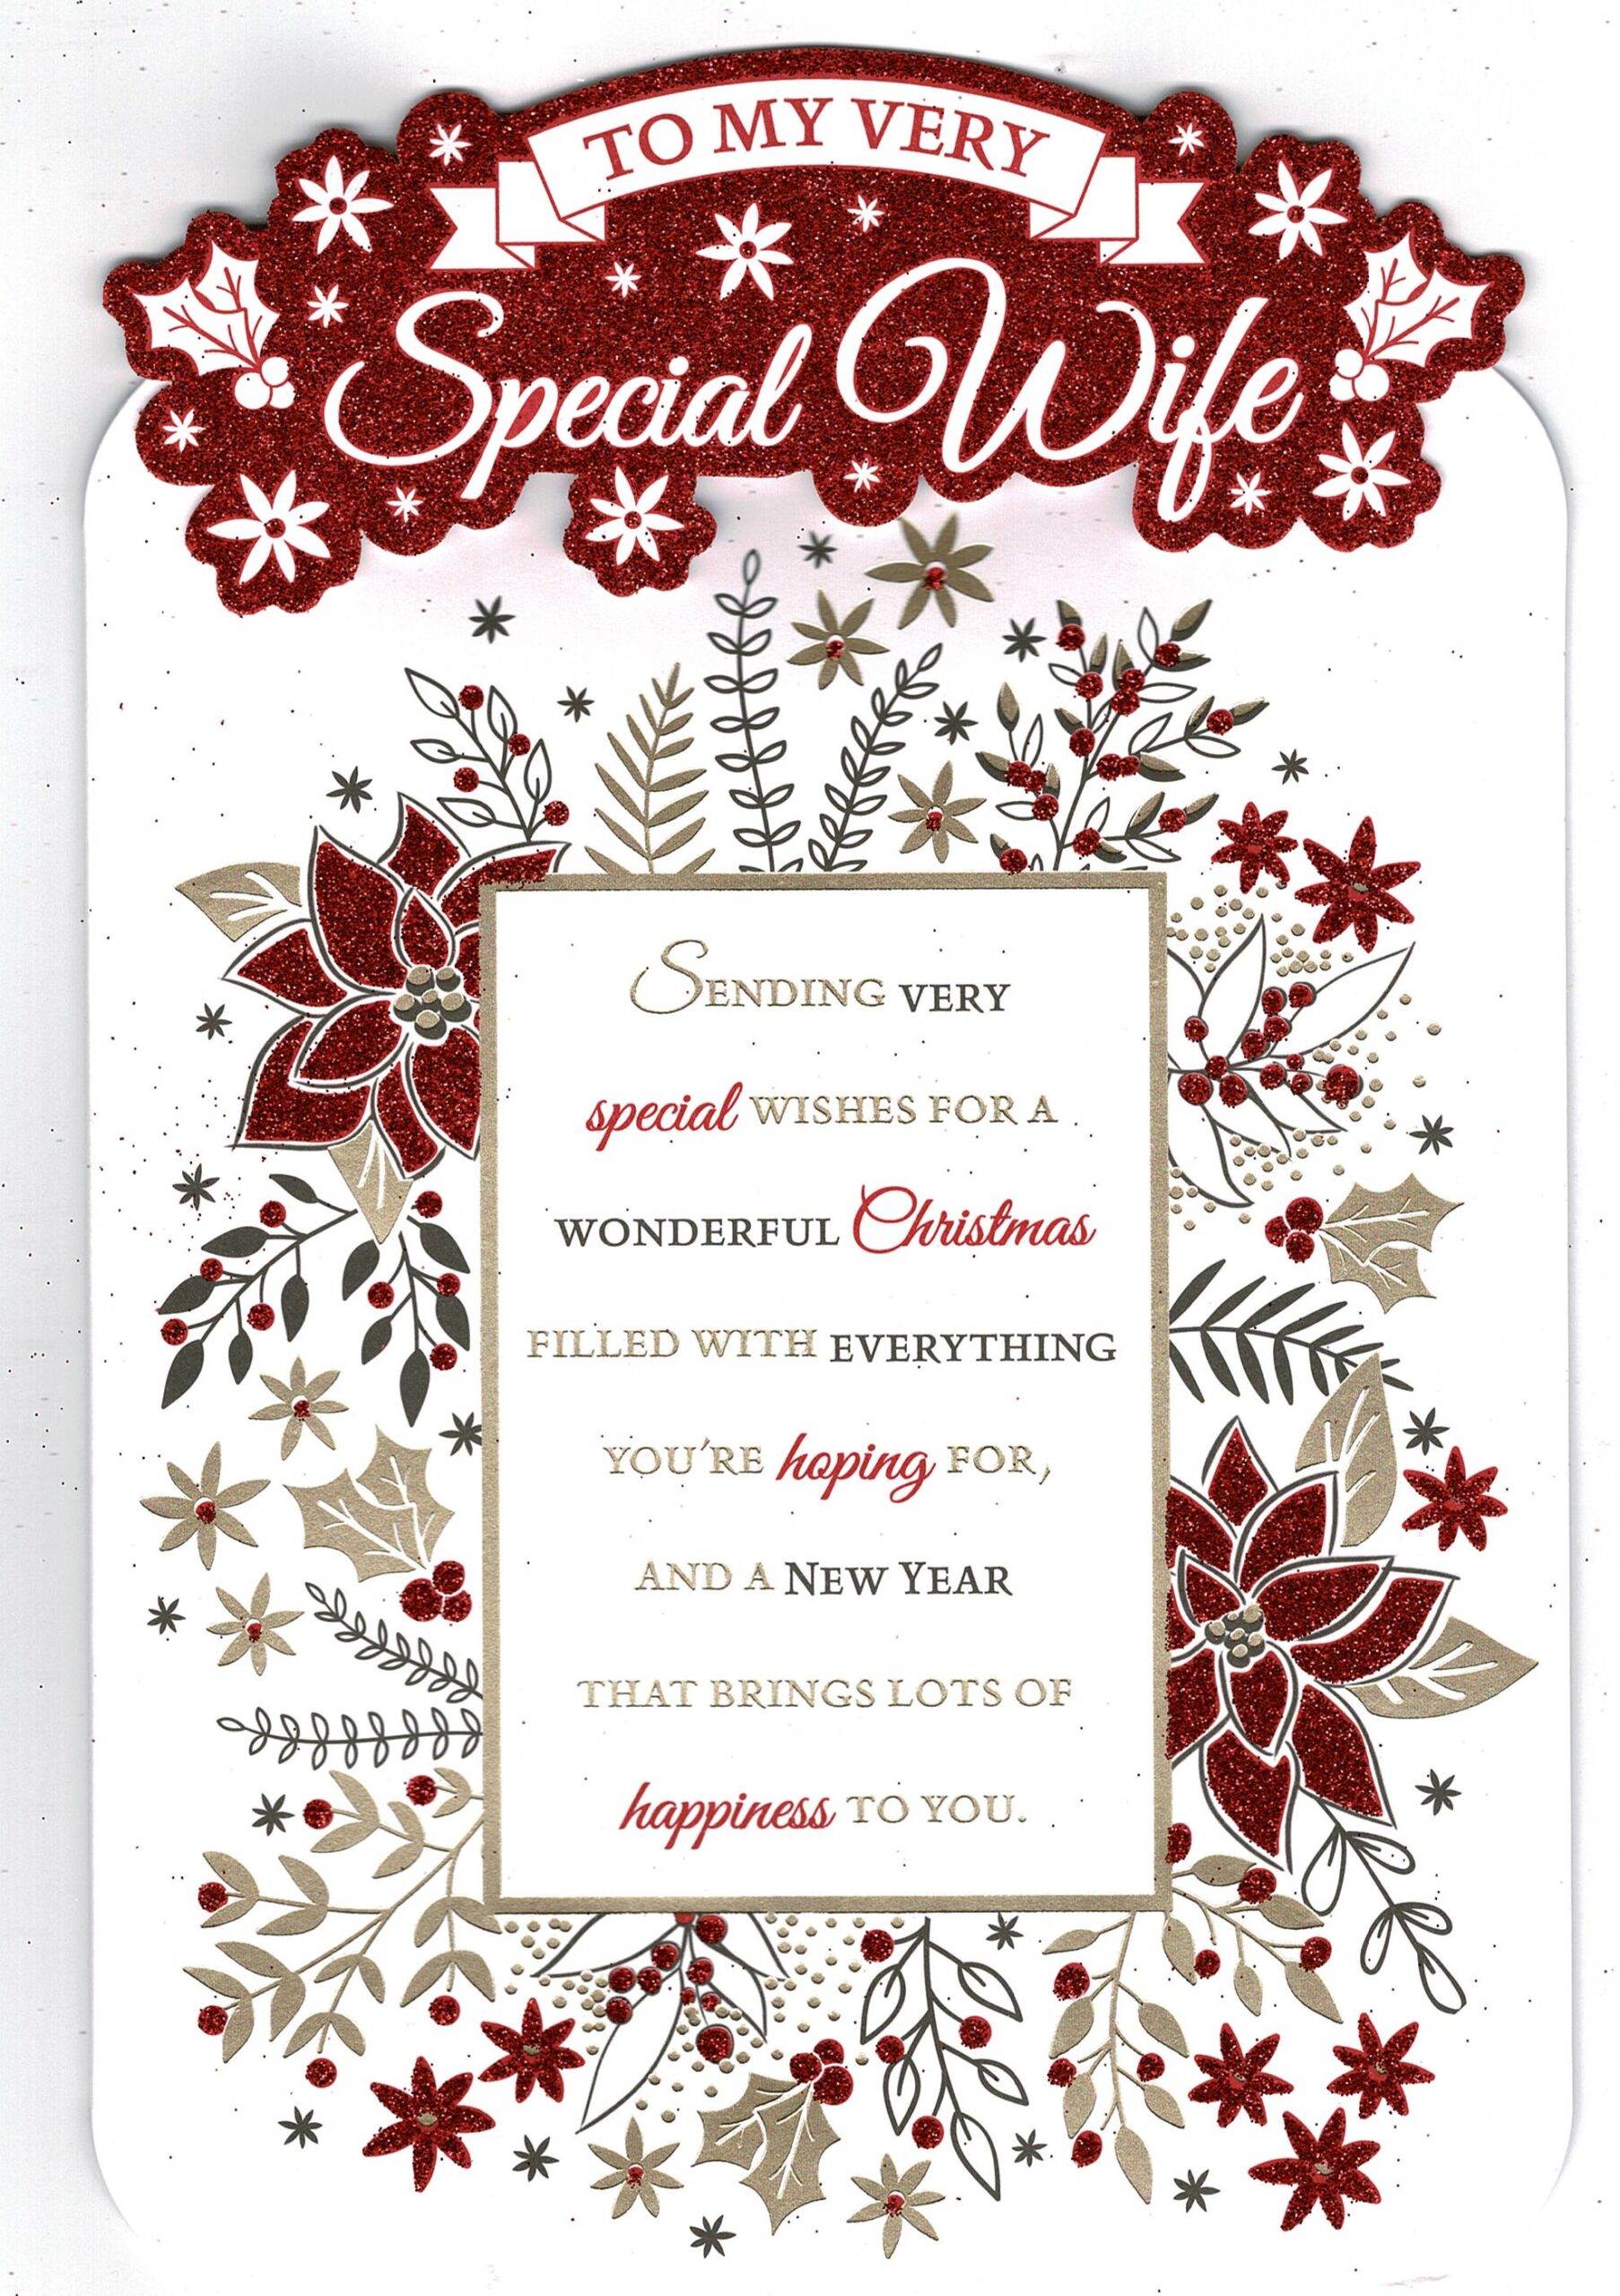 wife-christmas-card-to-my-very-special-wife-with-festive-sentiment